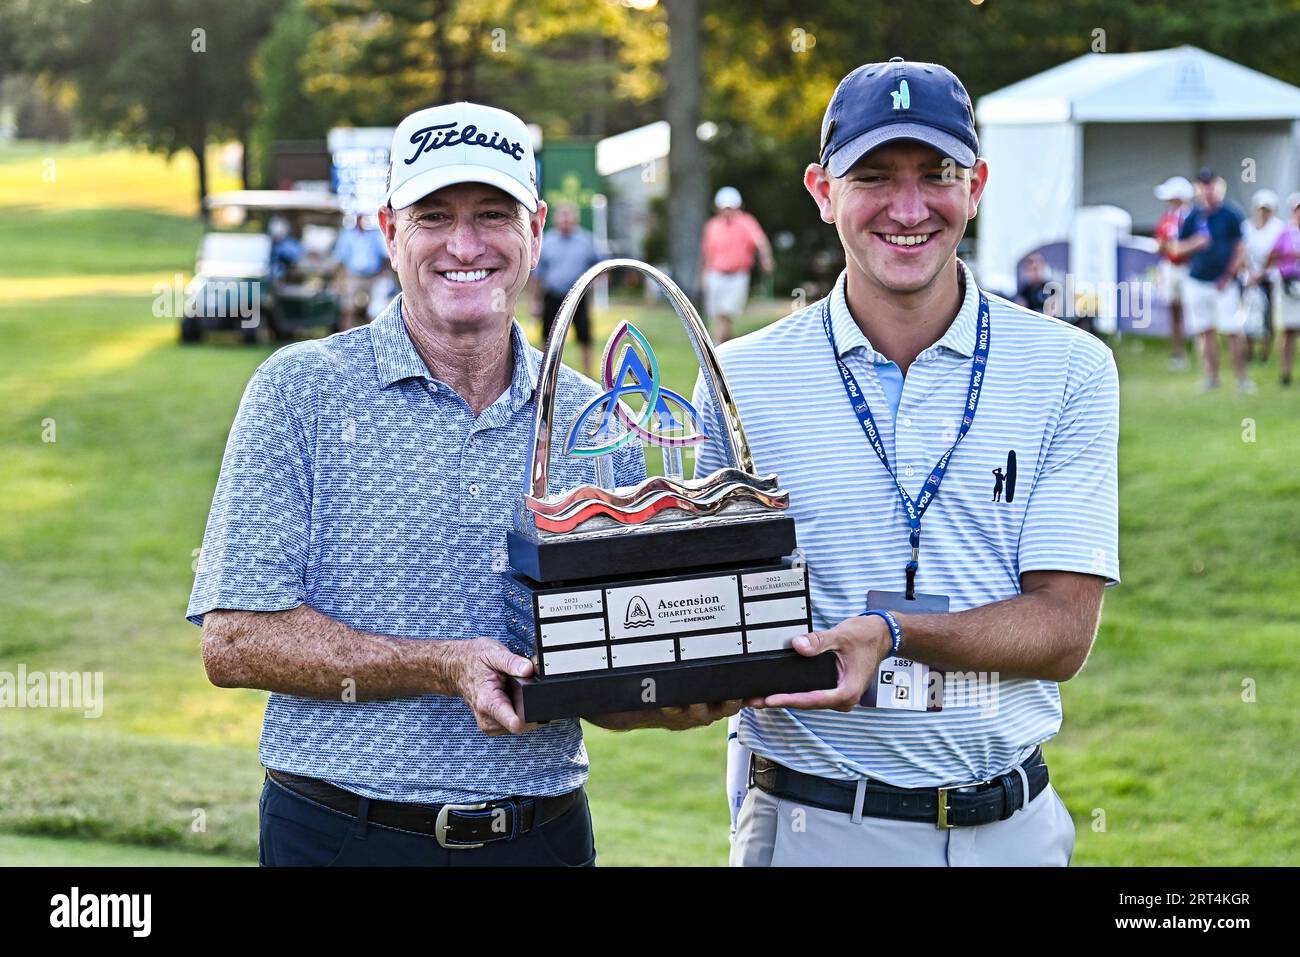 St. Louis, USA. September 10, 2023: Steve Flesch of the United States and his son Griffin who caddied for him in the tournament hoist the championship trophy after winning the Ascension Charity Classic held at Norwood Hills Country Club in Jennings, MO Richard Ulreich/CSM Credit: Cal Sport Media/Alamy Live News Stock Photo